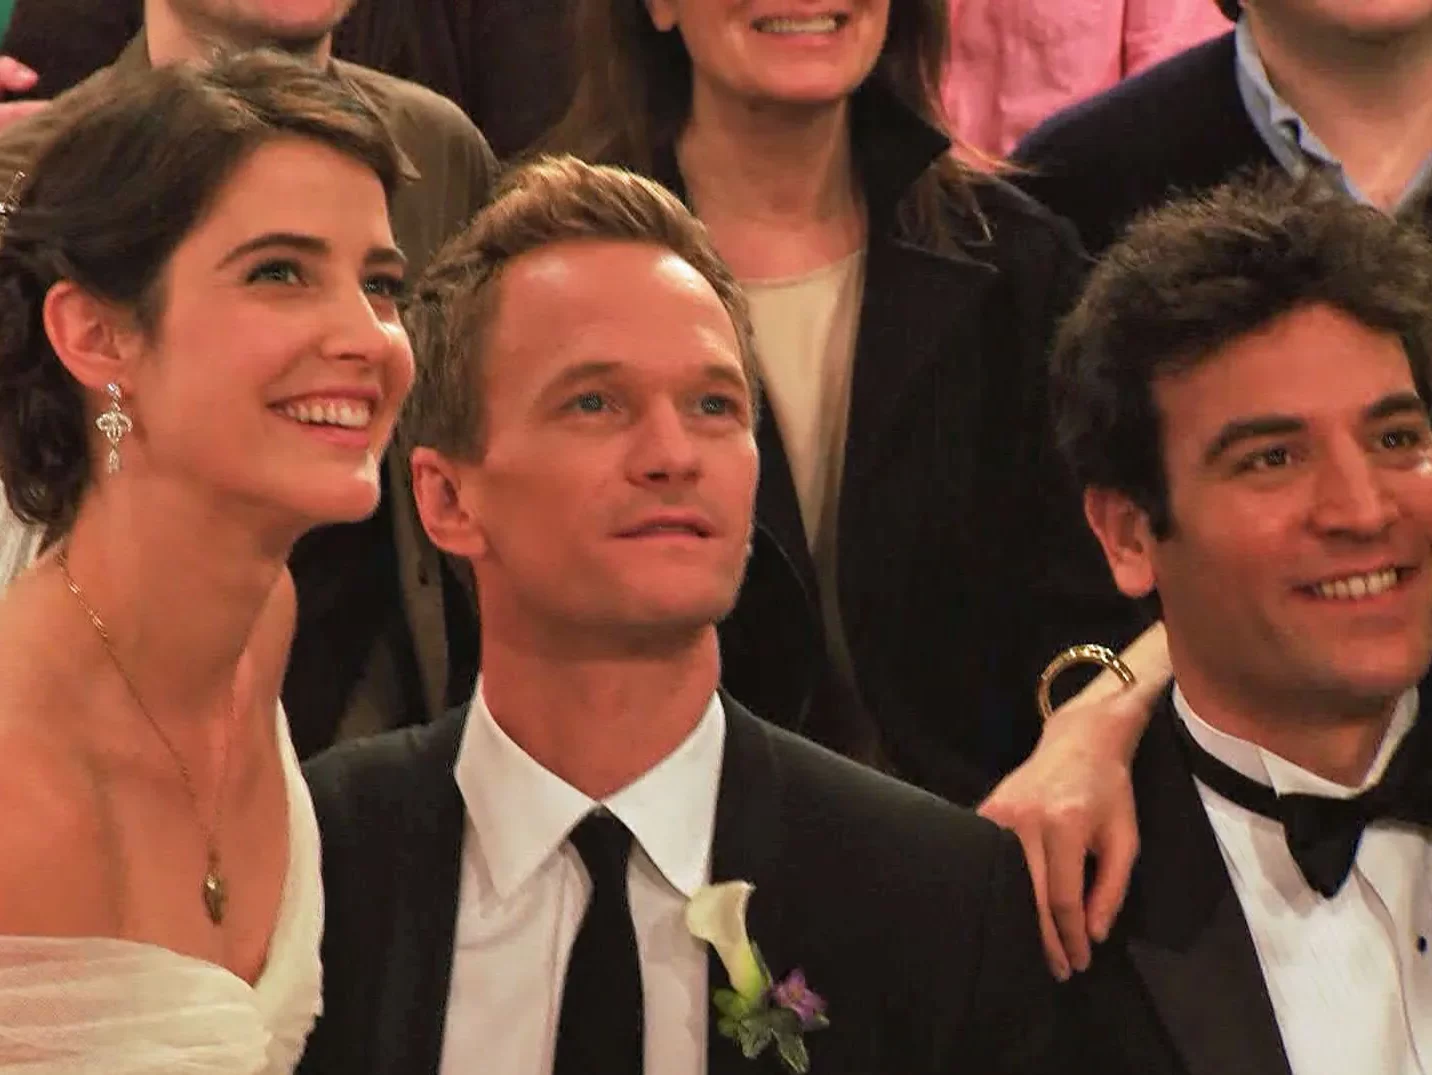 In an article about the series finale of "How I Met Your Mother," a picture of three of the main characters, Robin, Barney, and Ted